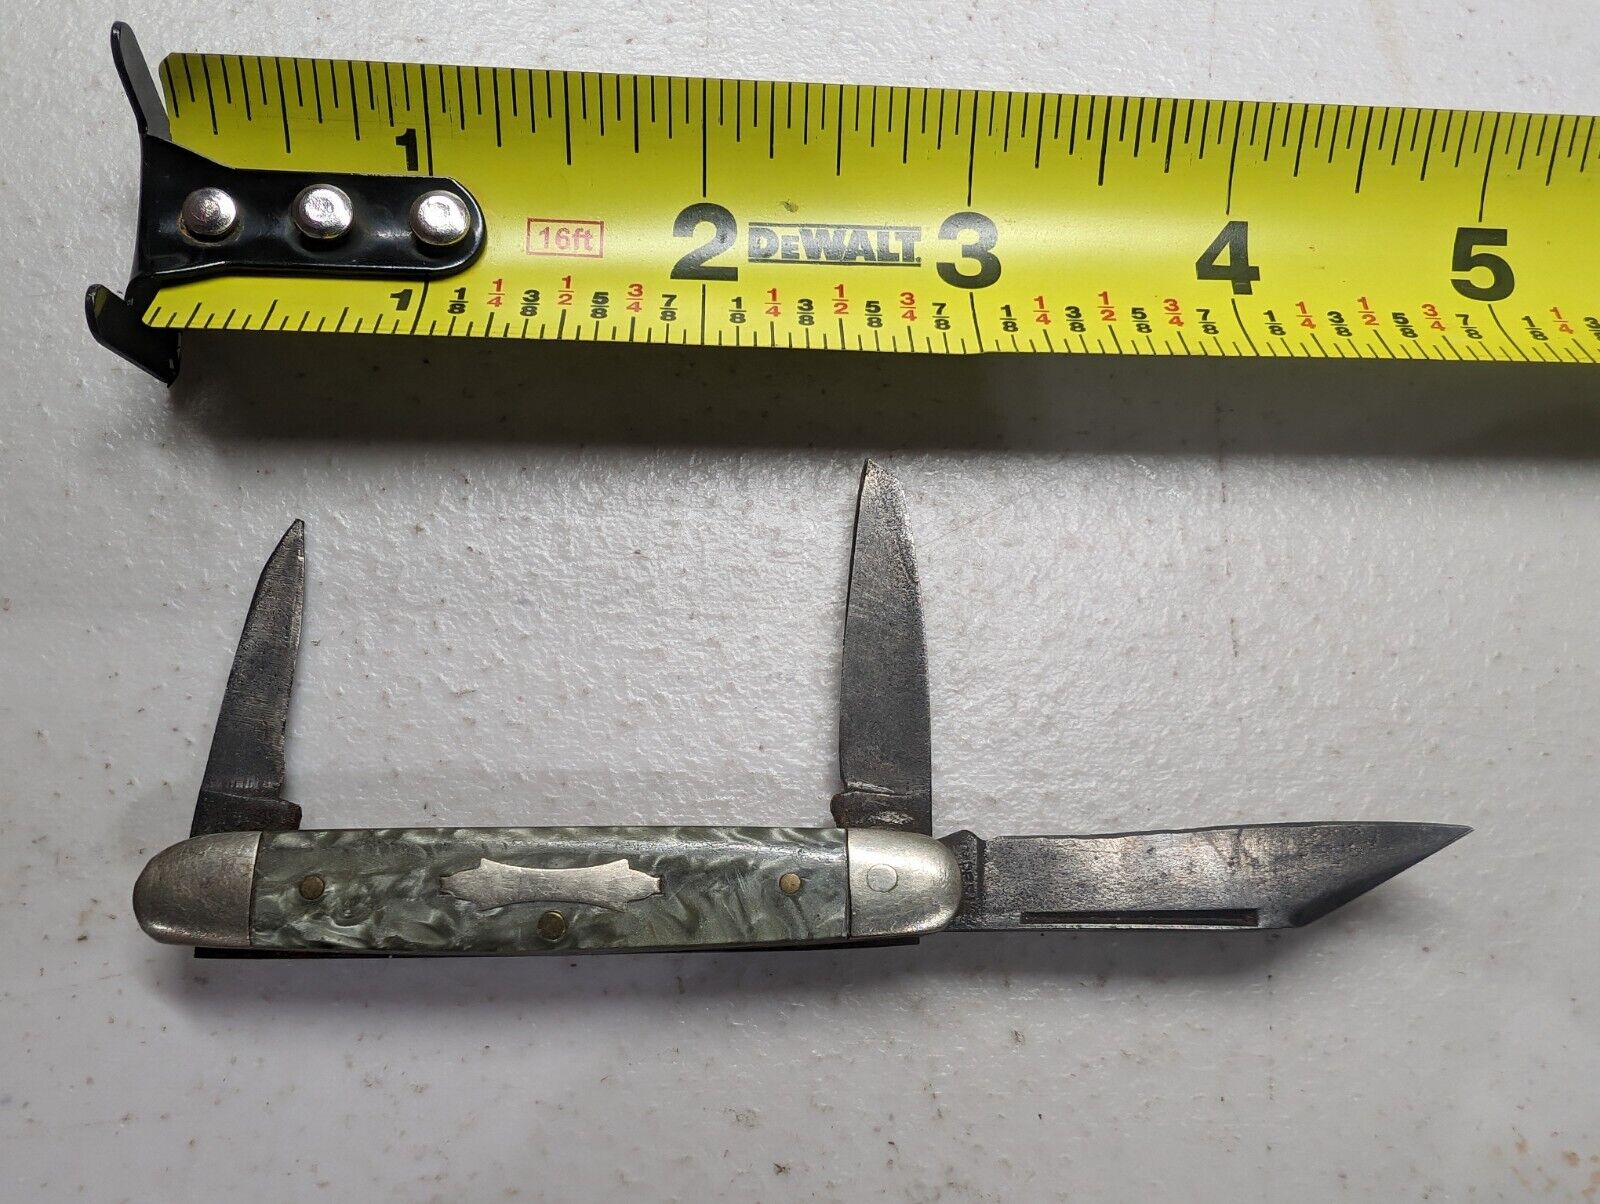  Extra Vintage Imperial 3 Blade Knife Green Handle VERY RARE